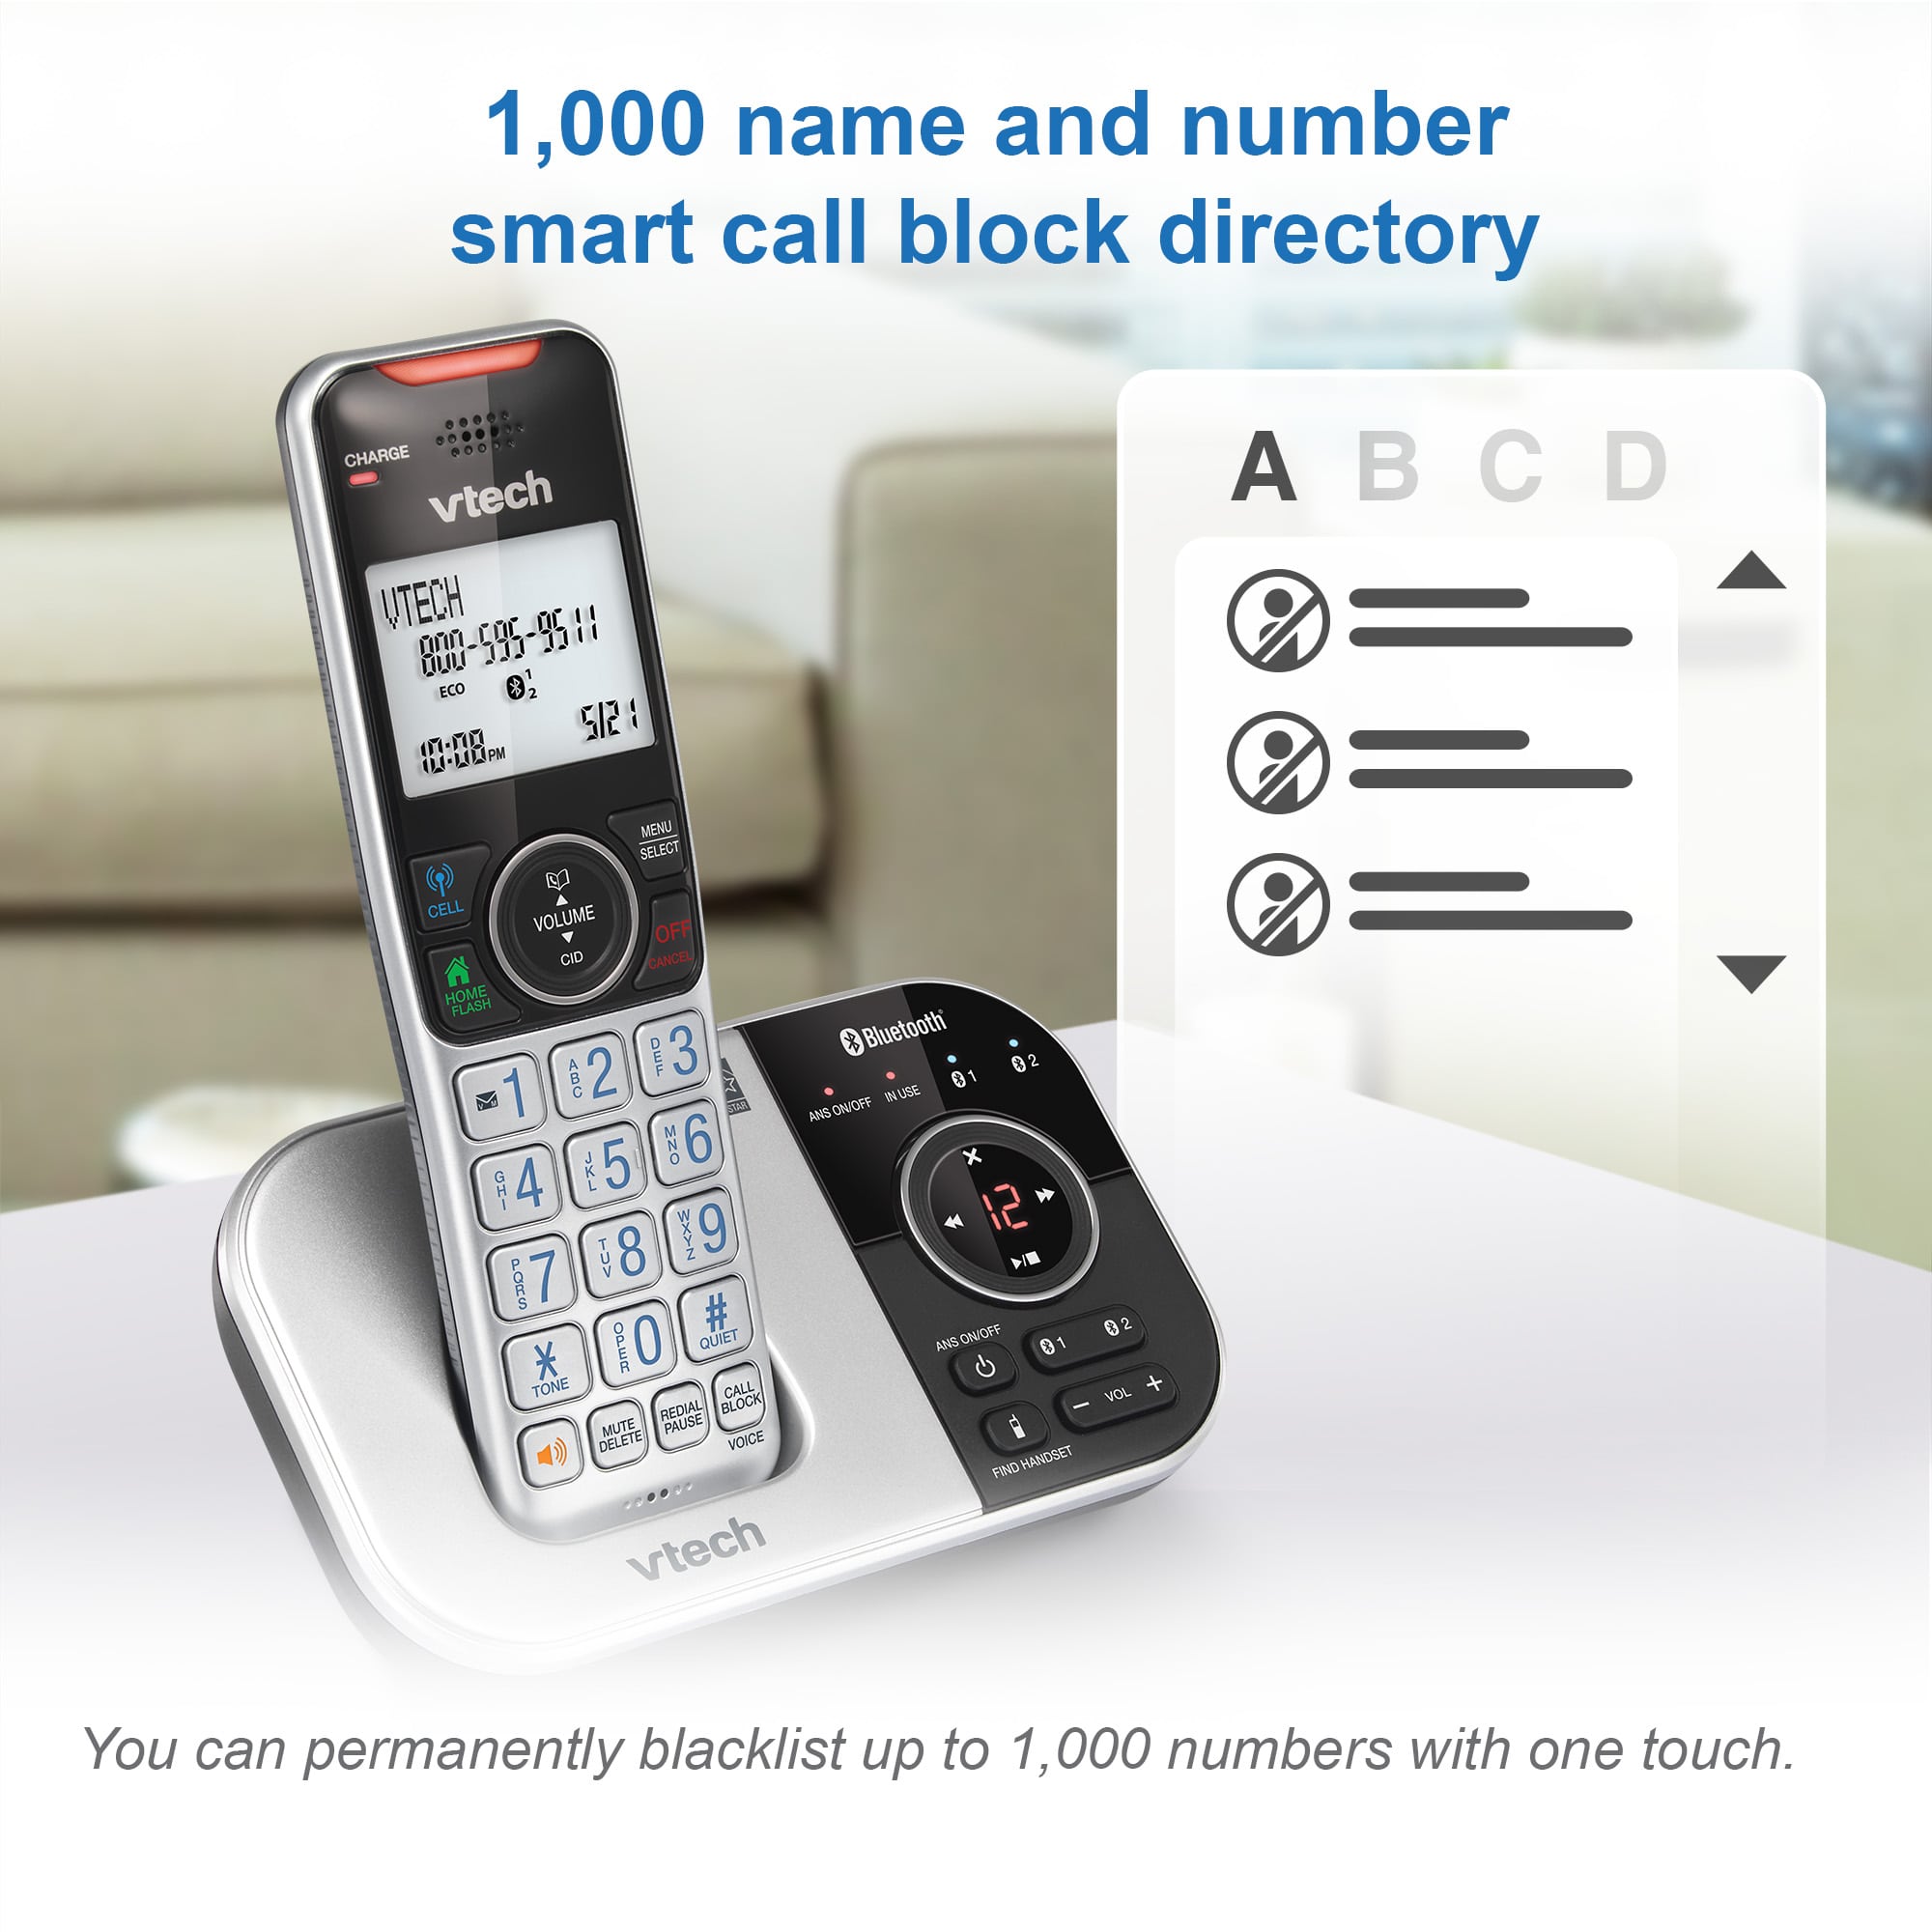 2-Handset Expandable Cordless Phone with Bluetooth Connect to Cell, Smart Call Blocker and Answering System (Silver & Black) - view 9